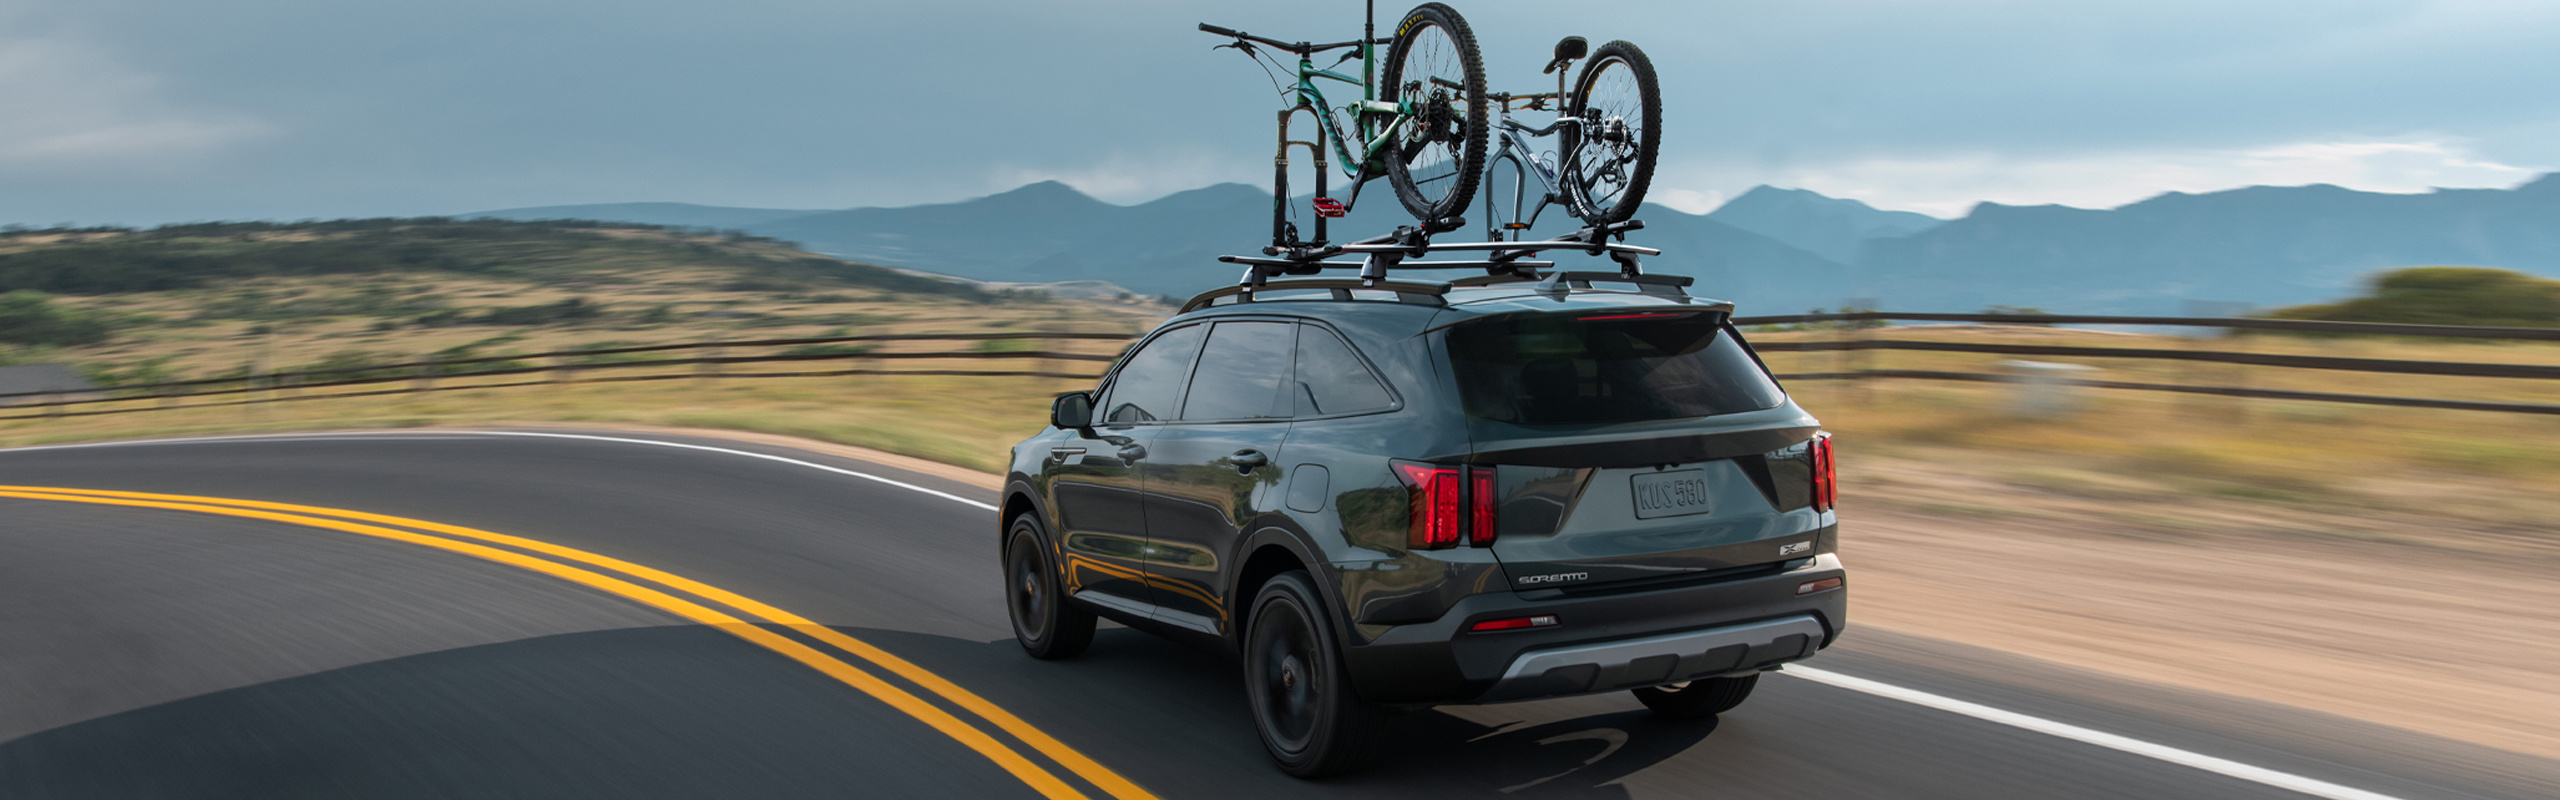 2023 Kia Sorento Driving On An Open Road With A Bike Rack Equipped Rear Three-Quarter View